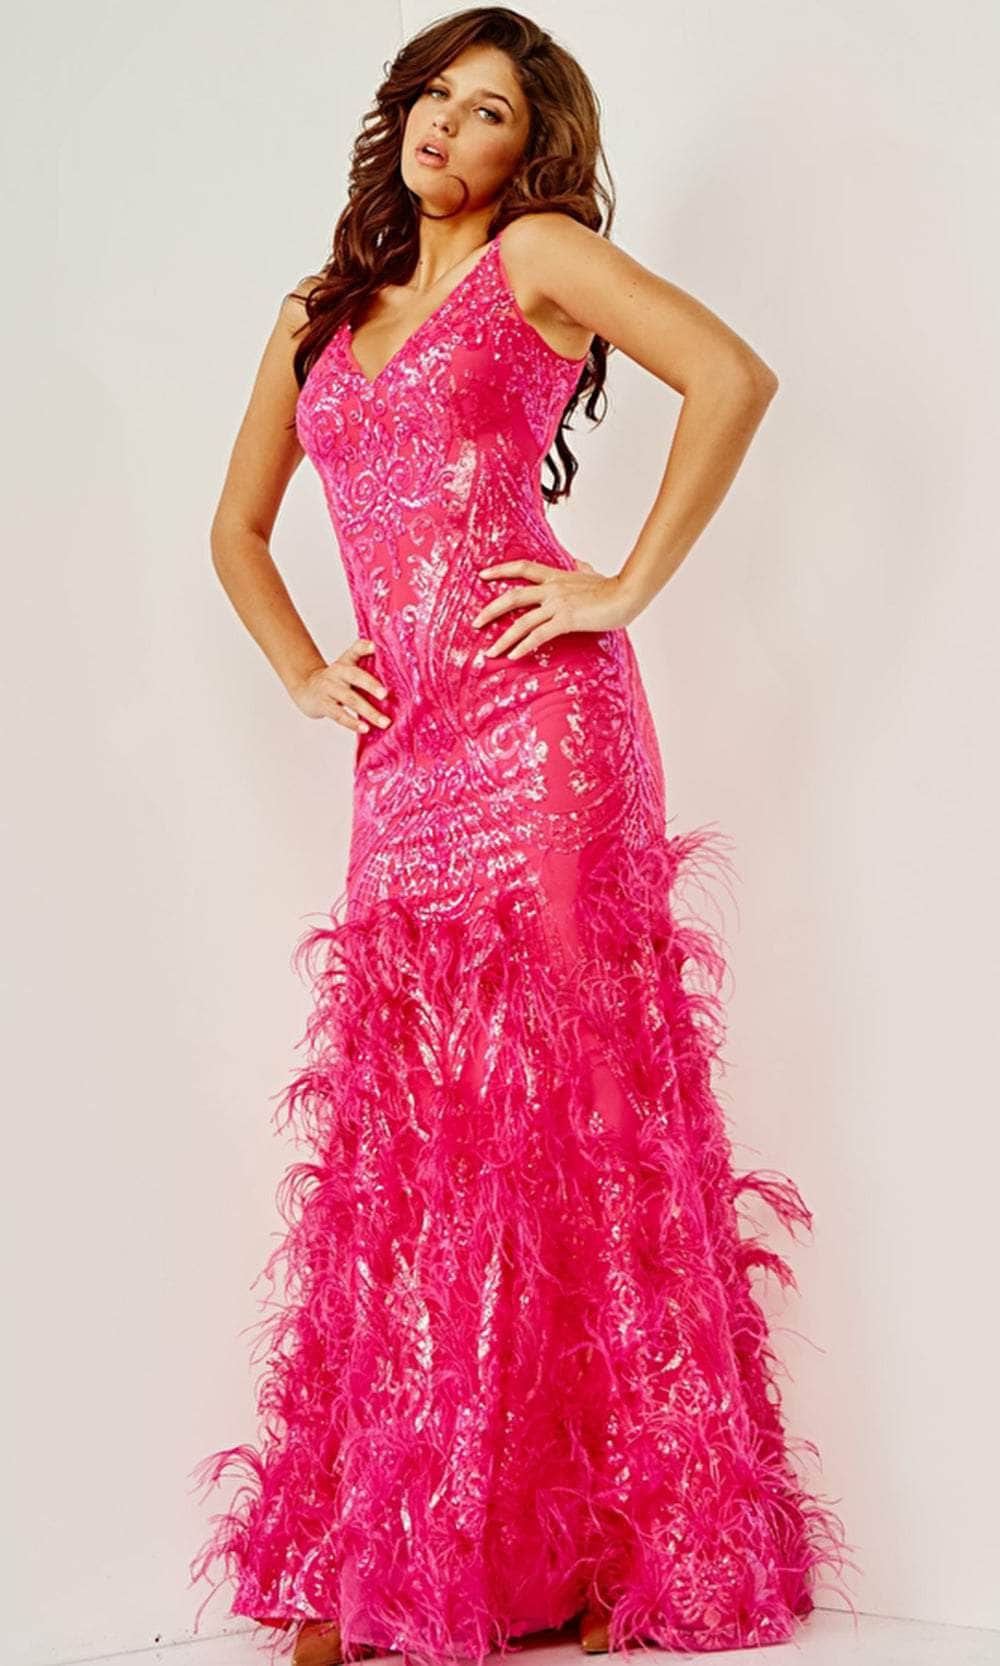 Image of Jovani 07808 - Feathered Skirt Evening Gown